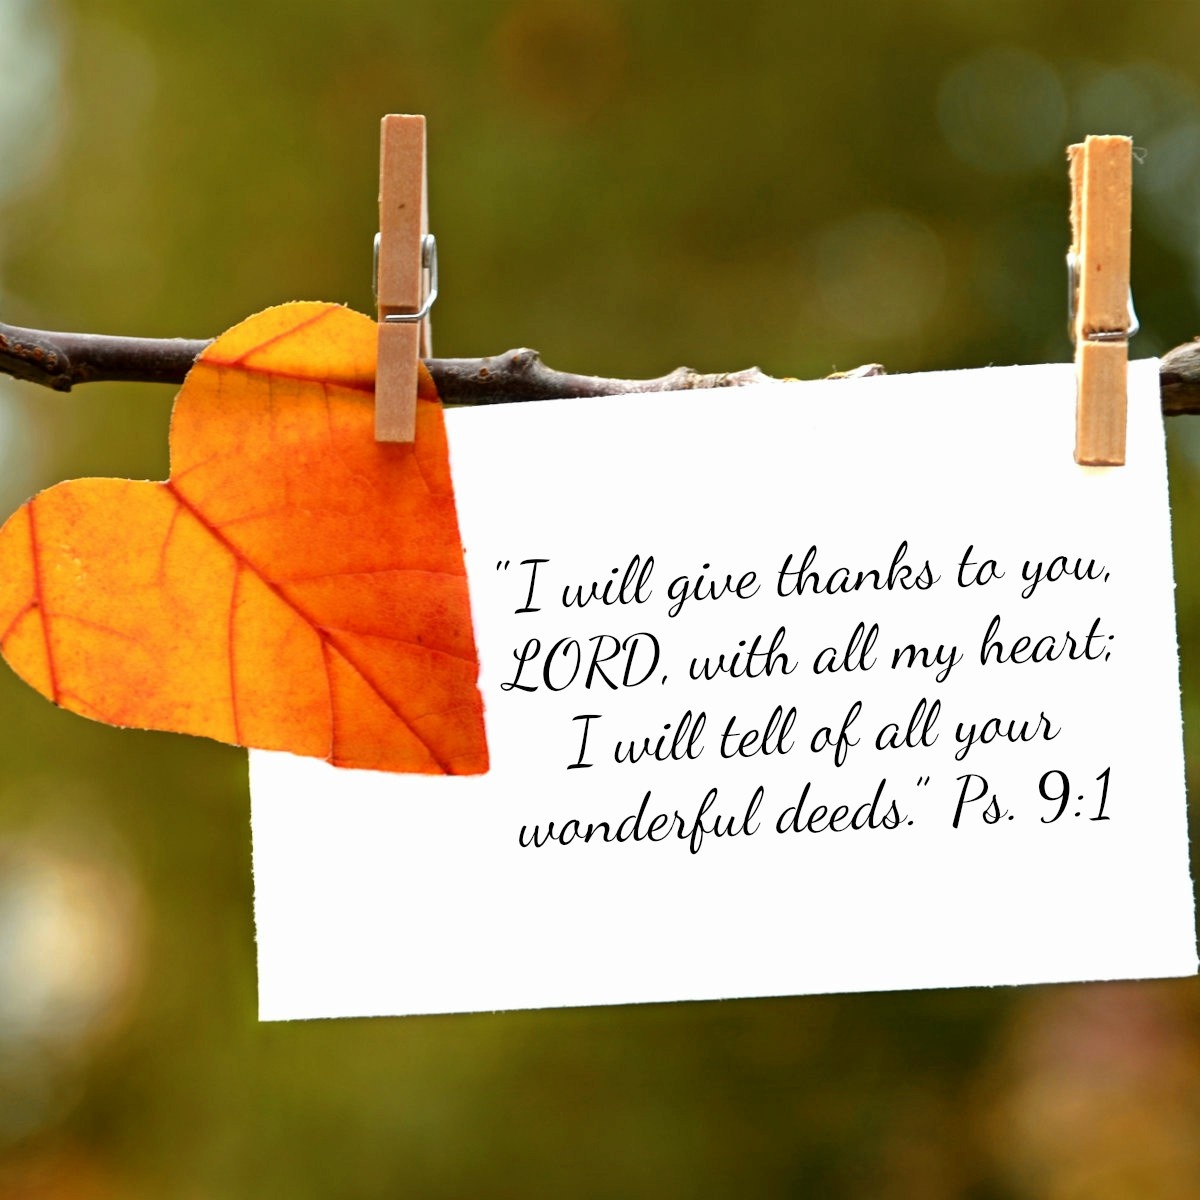 The Power of a Grateful Heart: 21 Verses of Thanks to God ~ Debbie McDaniel